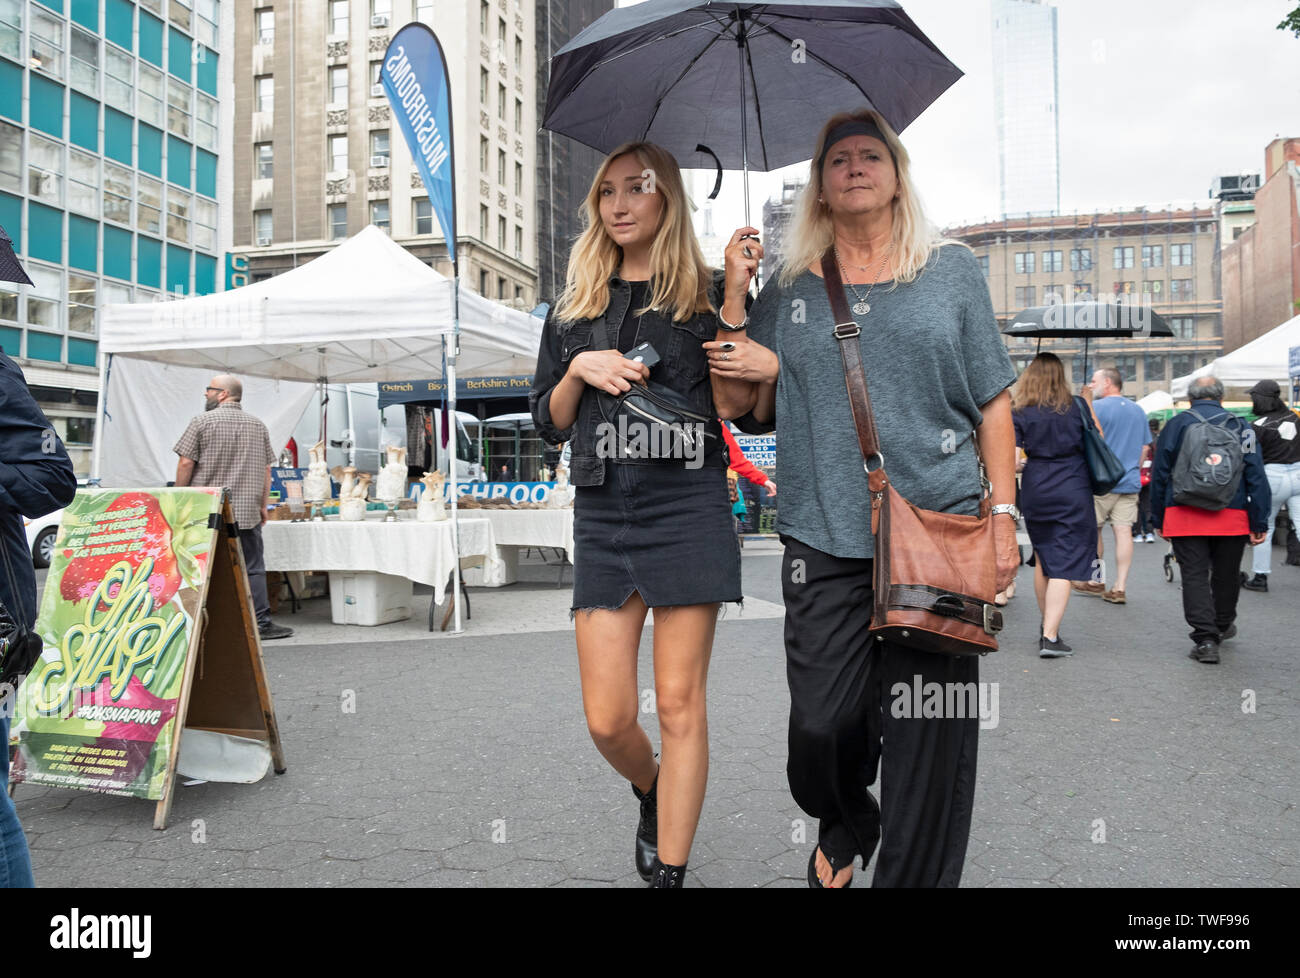 Two women who appear to be mother & daughter, share an umbrella while walking through the Union Square Green Market in lower Manhattan, New York City. Stock Photo